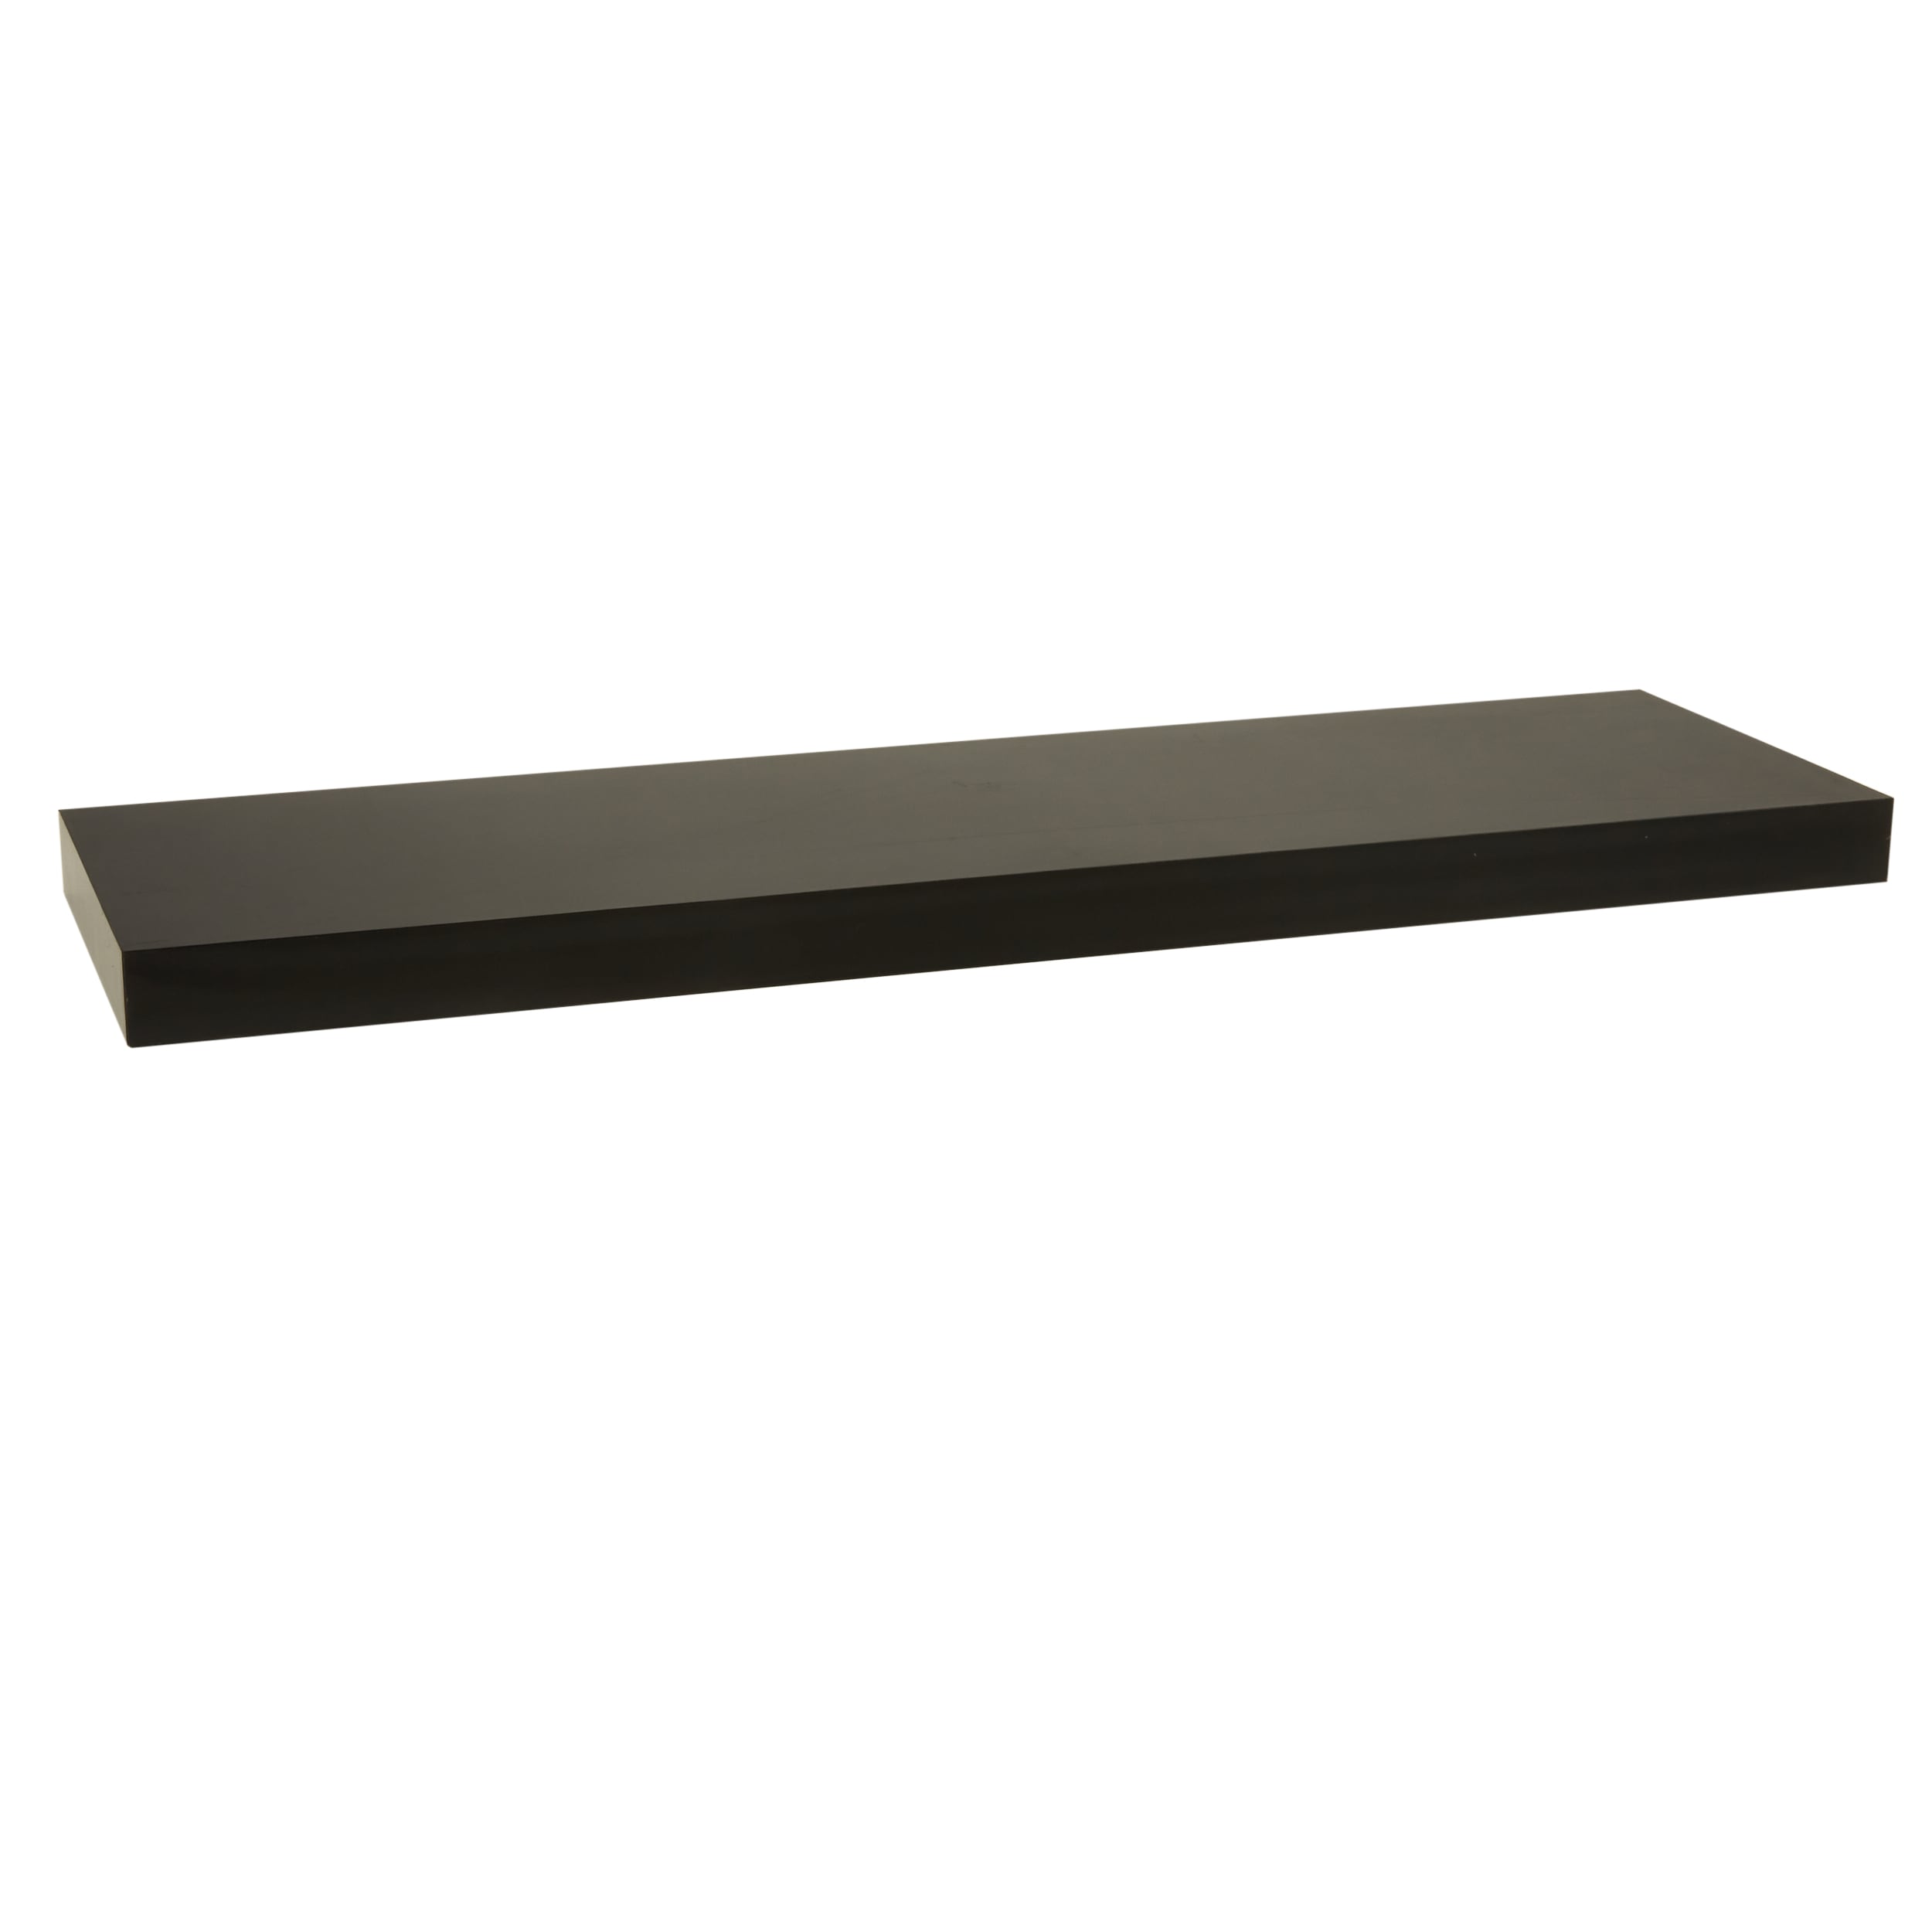 1 black made to measure floating shelf 1260mm x 200mm x 25mm